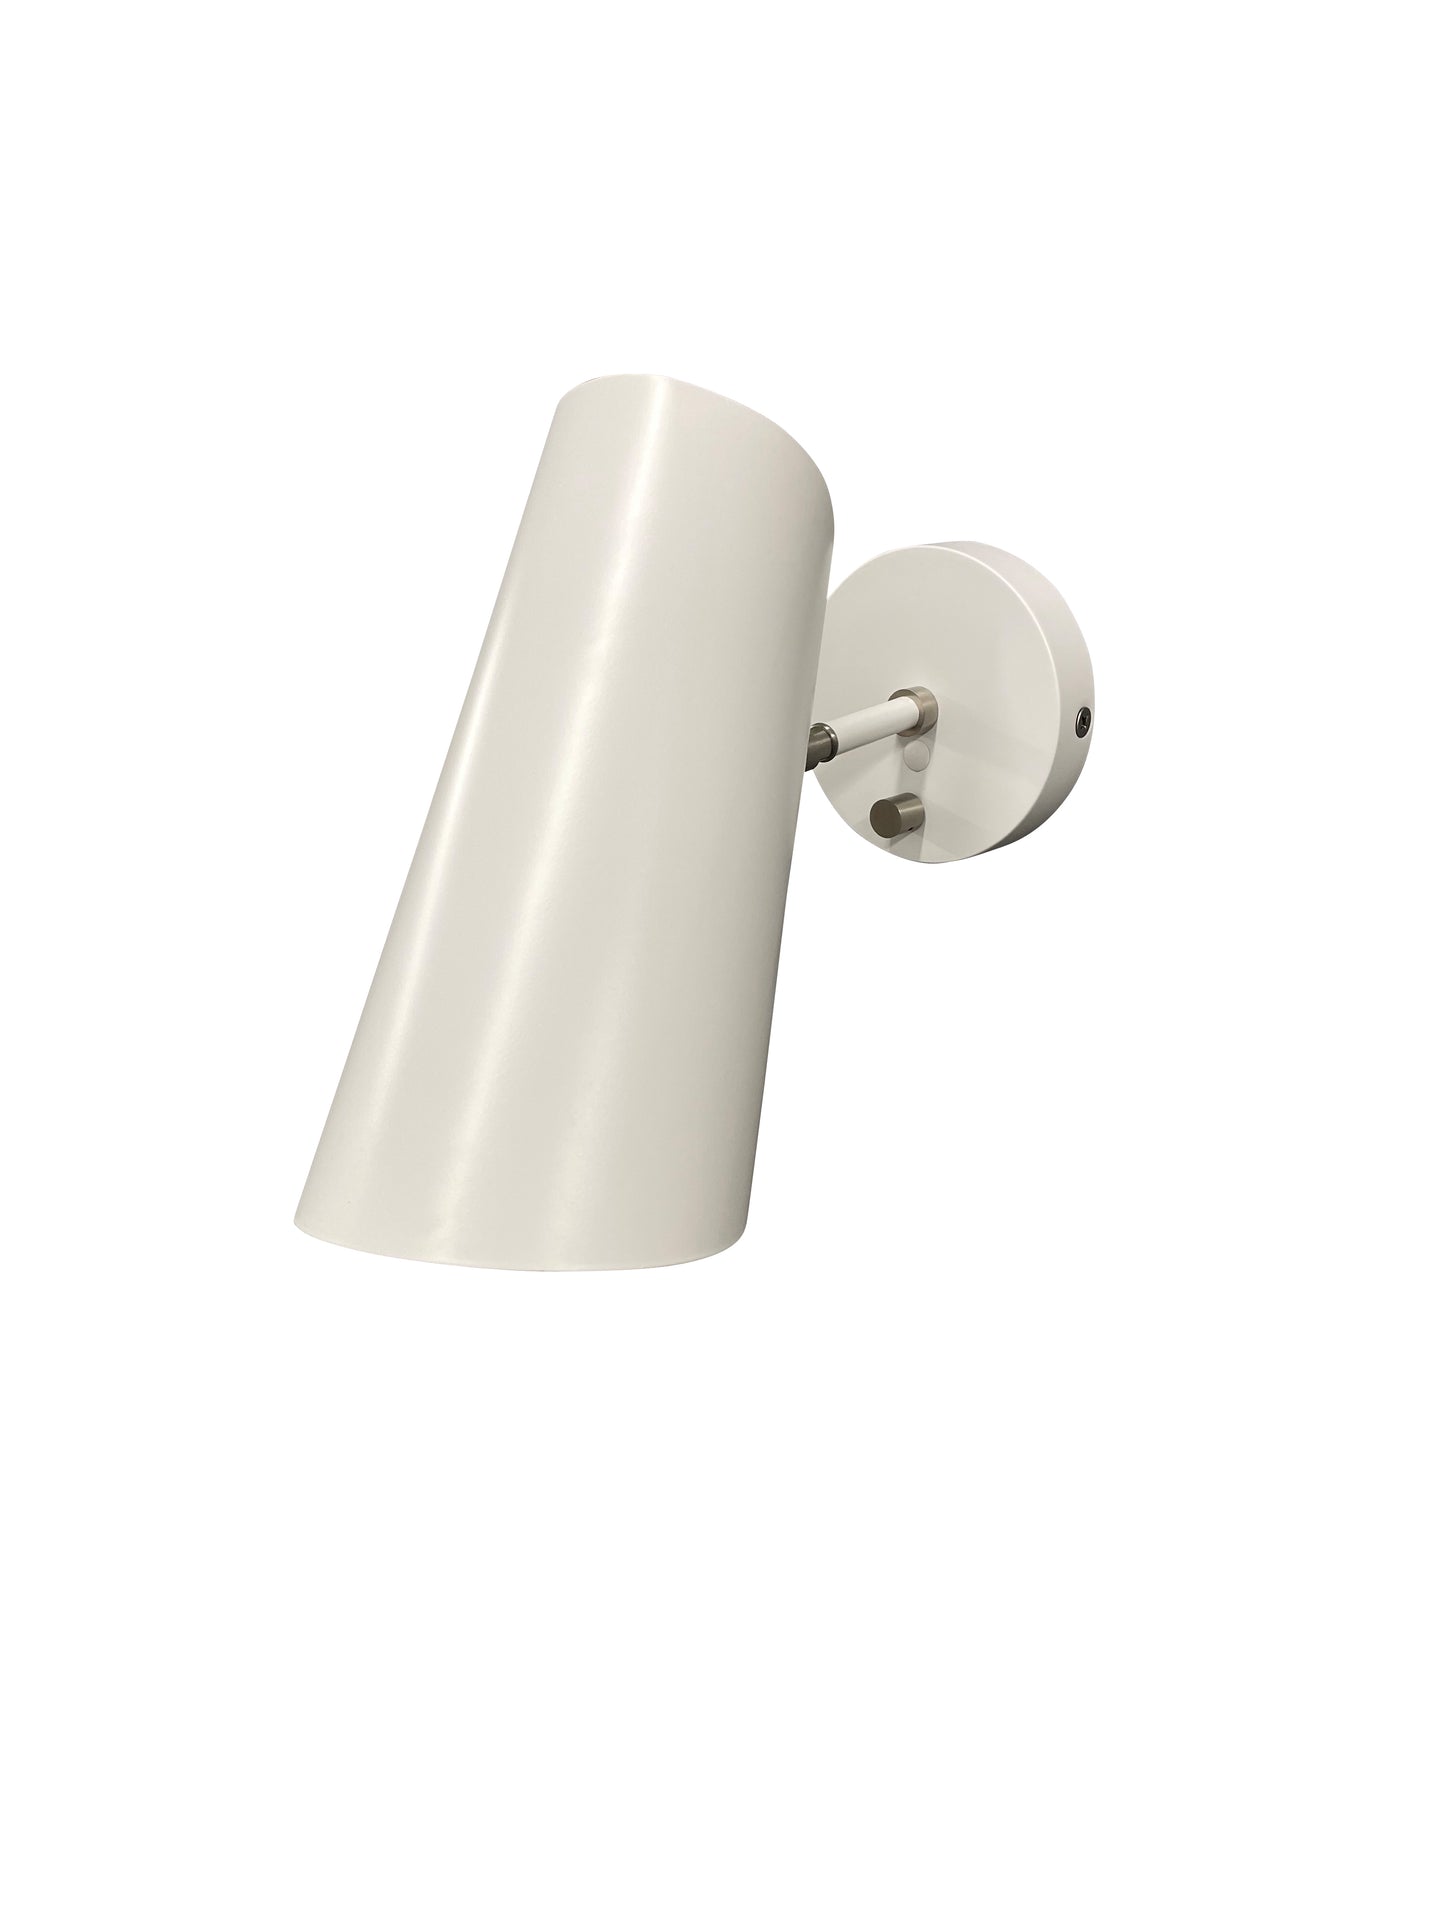 House of Troy Logan White/Satin Nickel Wall Sconce with rolled shade L325-WTSN